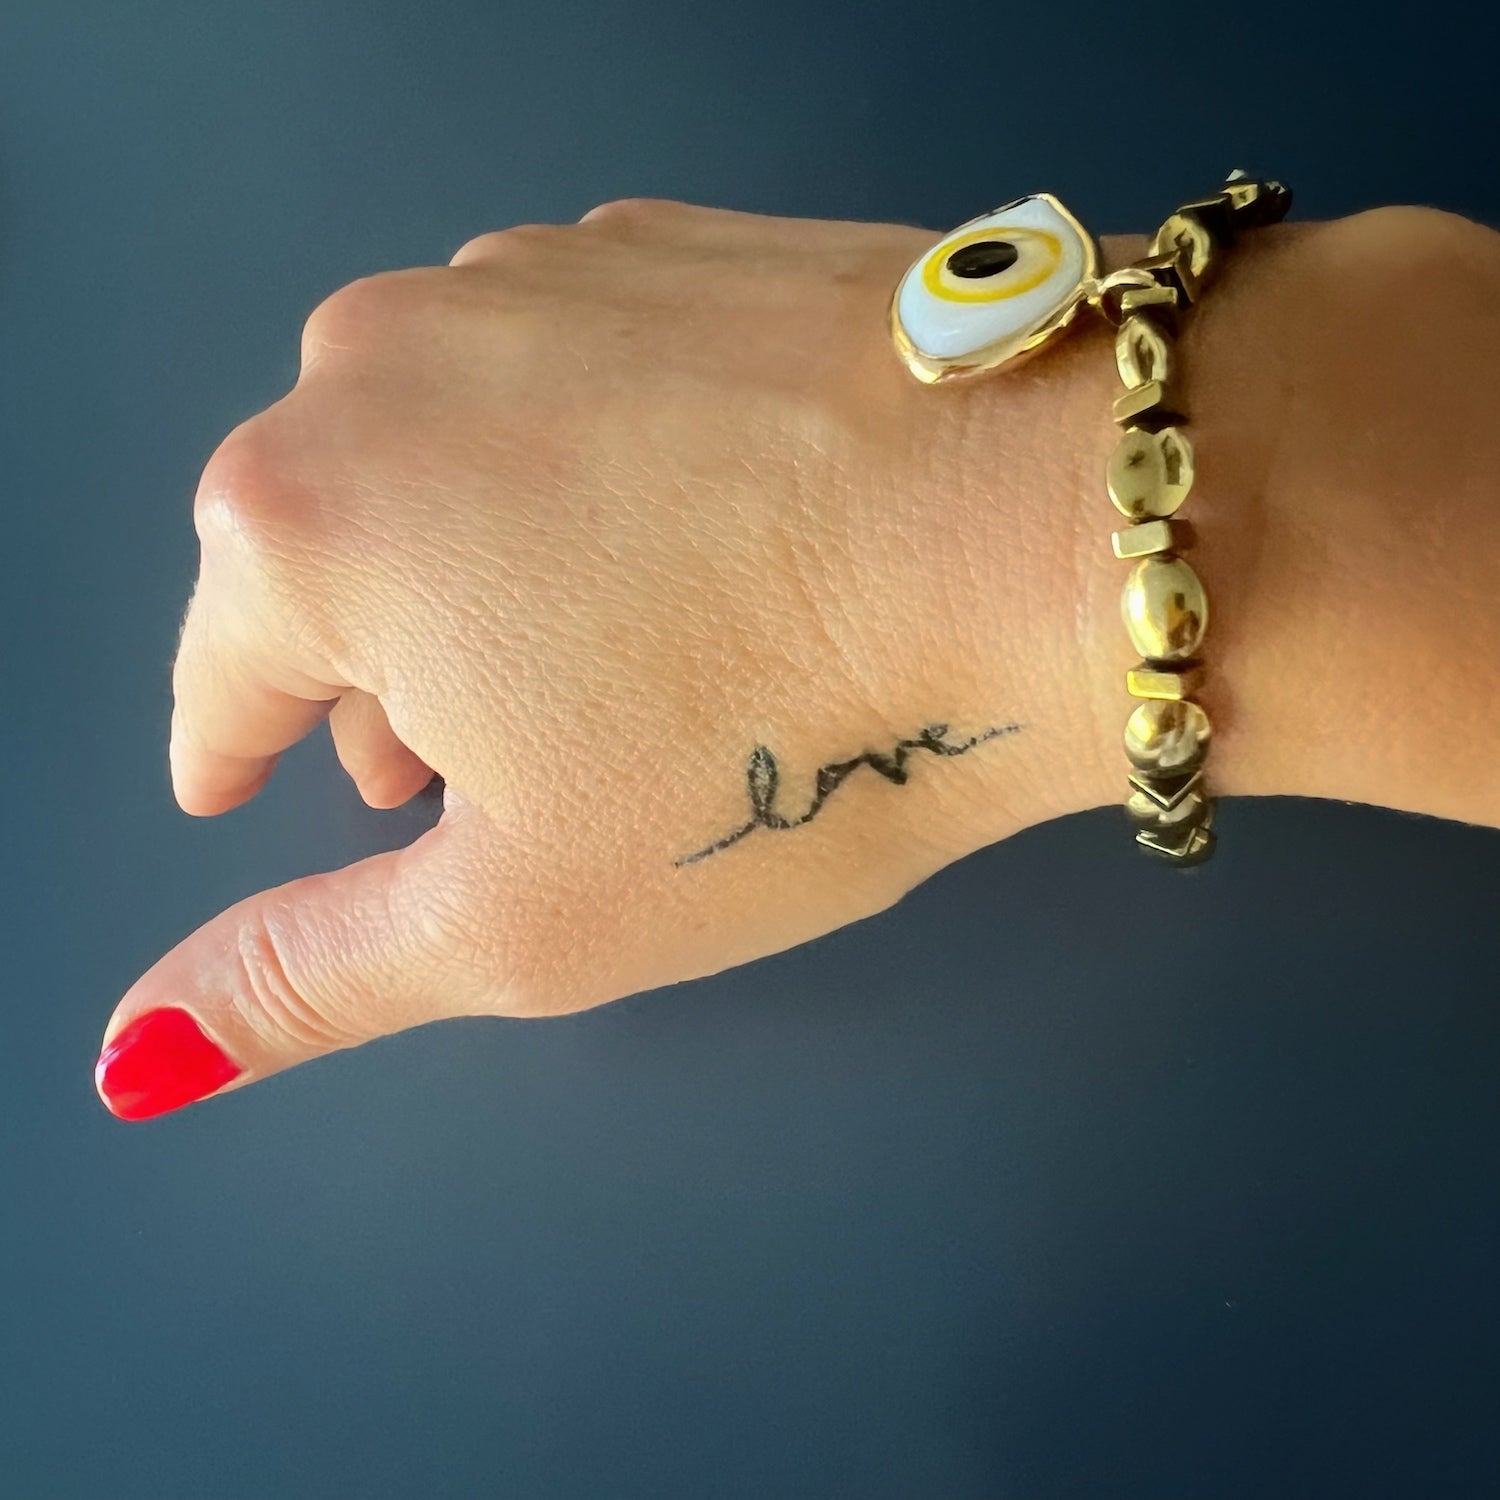 See how the Yellow Evil Eye Bracelet gracefully adorns the hand model's wrist, capturing attention with its stunning design and symbolism.